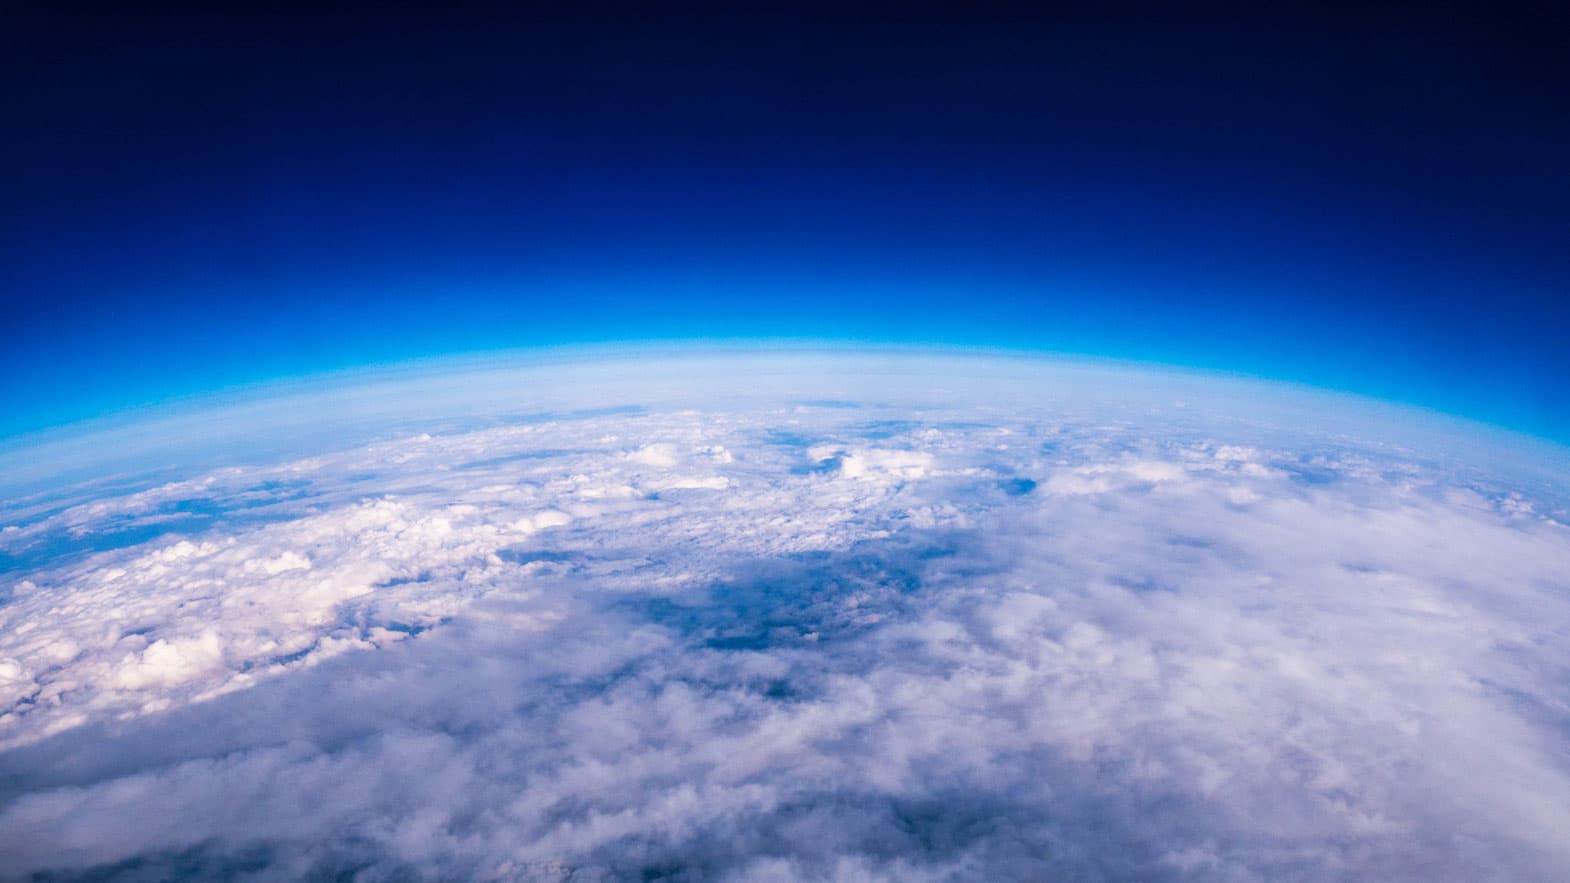 Earth's atmosphere is ringing like a bell